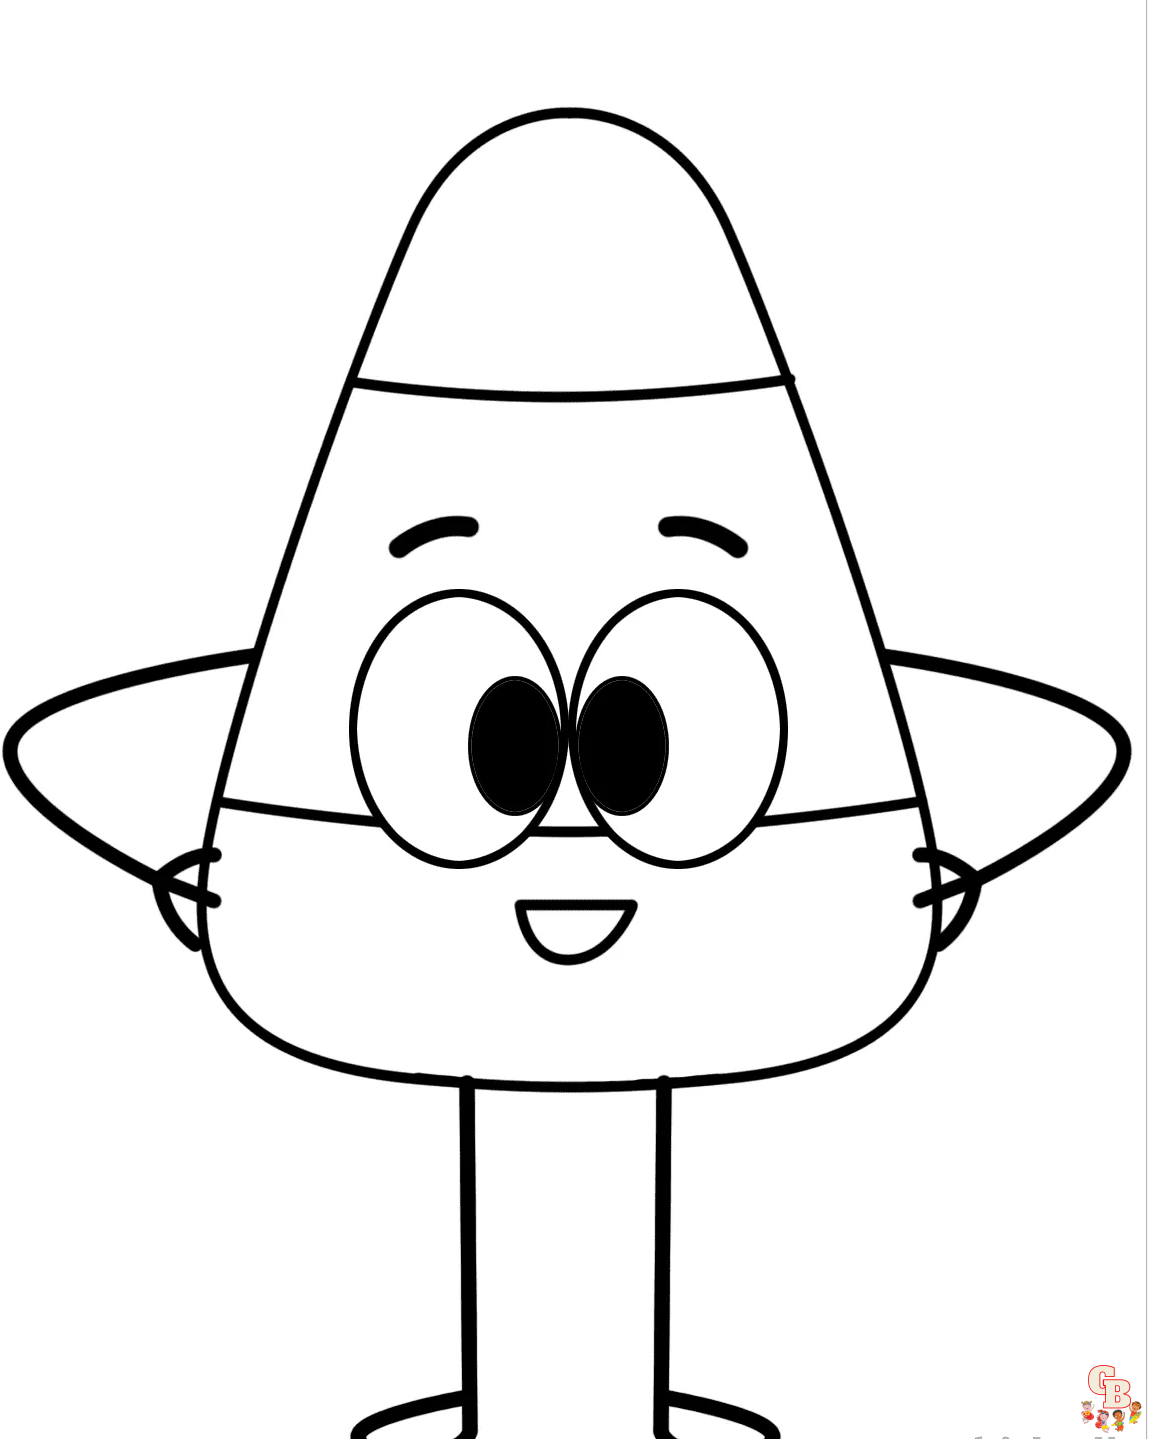 Candy Corn Coloring Pages 1